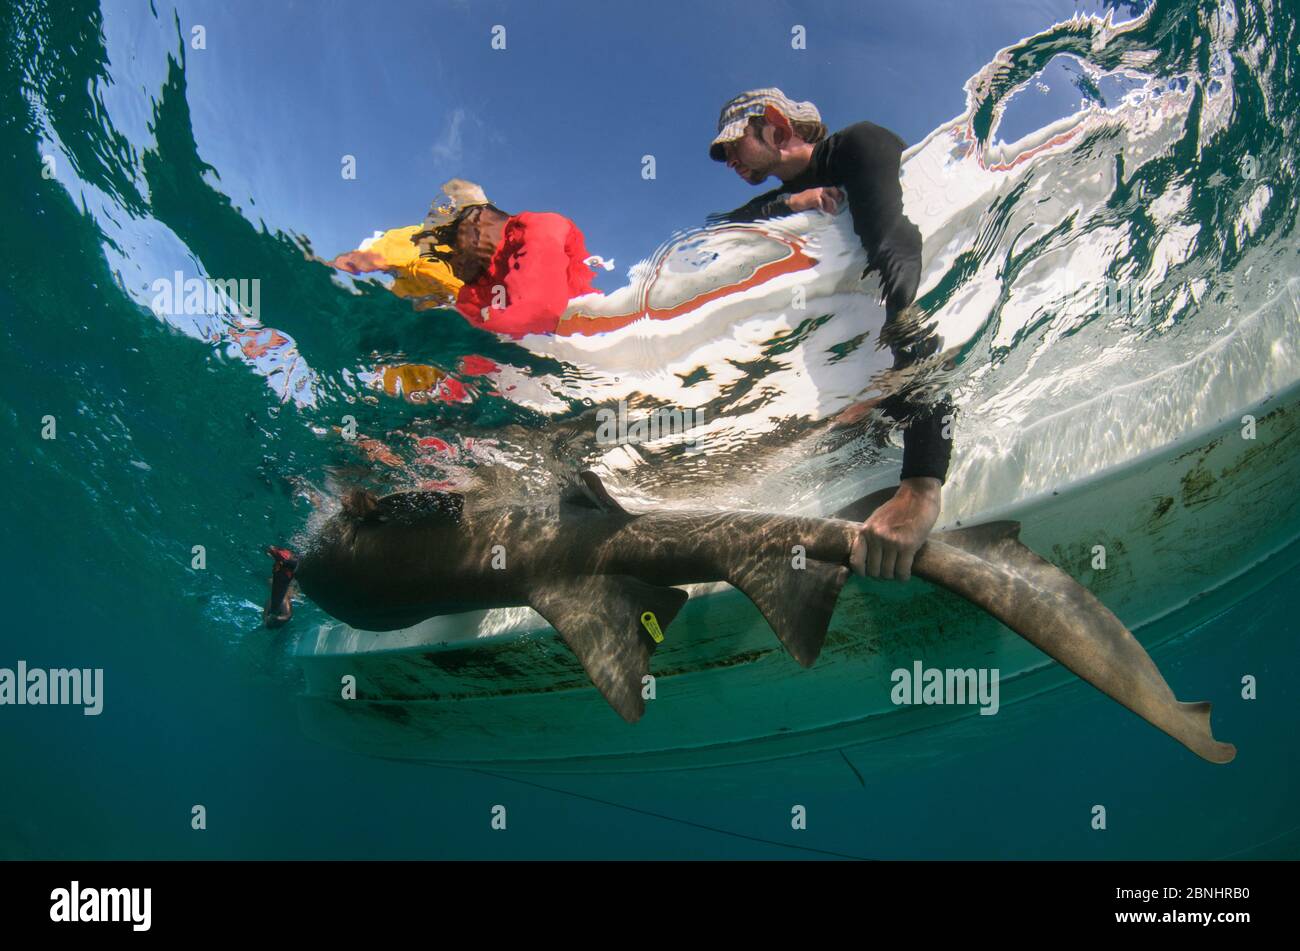 Nurse shark (Ginglymostoma cirratum) caught for research by MAR Alliance, Lighthouse Reef Atoll, Belize. May 2015. Stock Photo